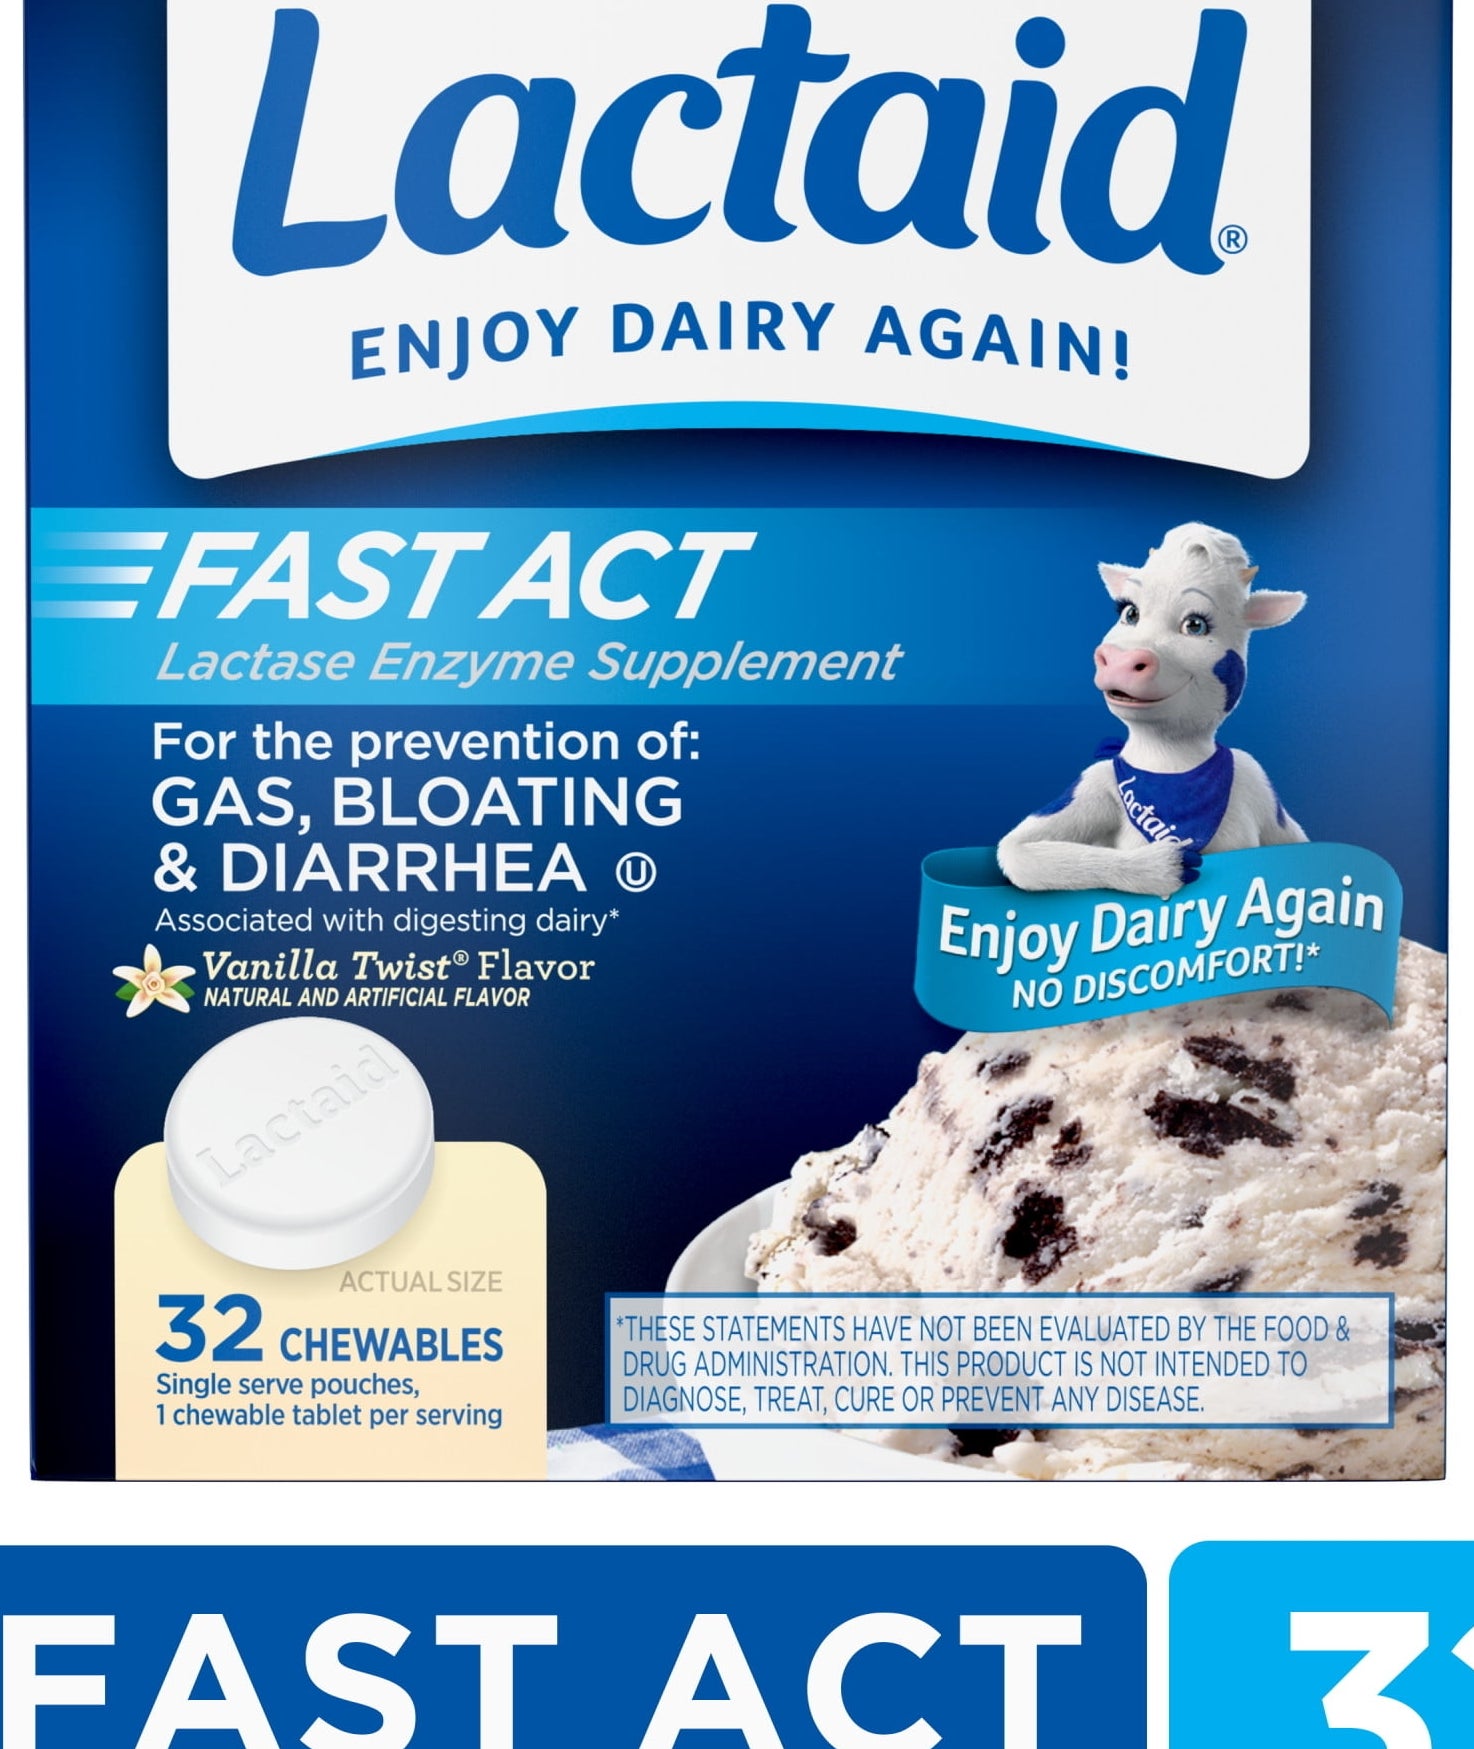 the packaging of lactose pills